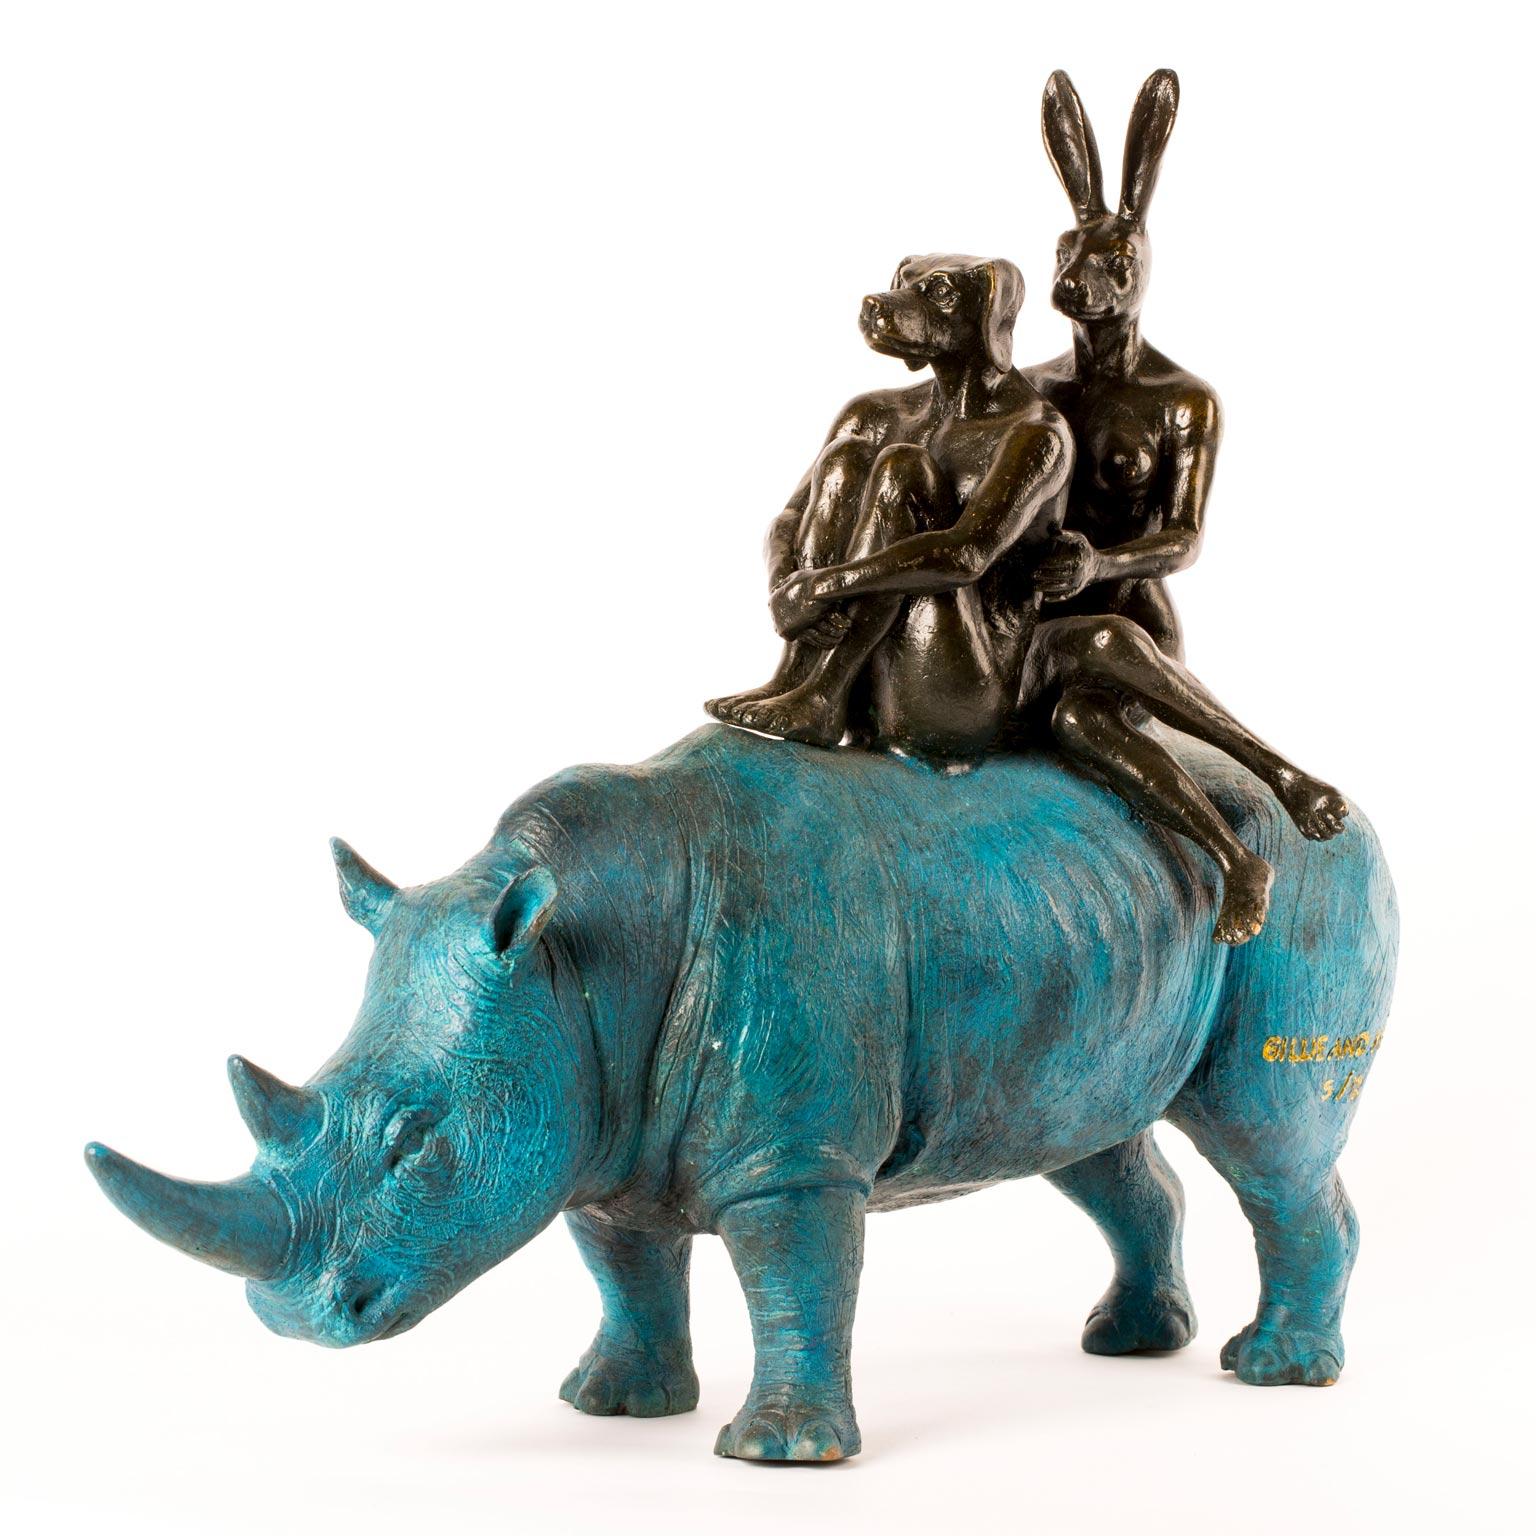 Gillie and Marc Schattner Figurative Sculpture - Bronze Animal Sculpture - Limited Edition - Blue Patina Rhino Riders - 2019 